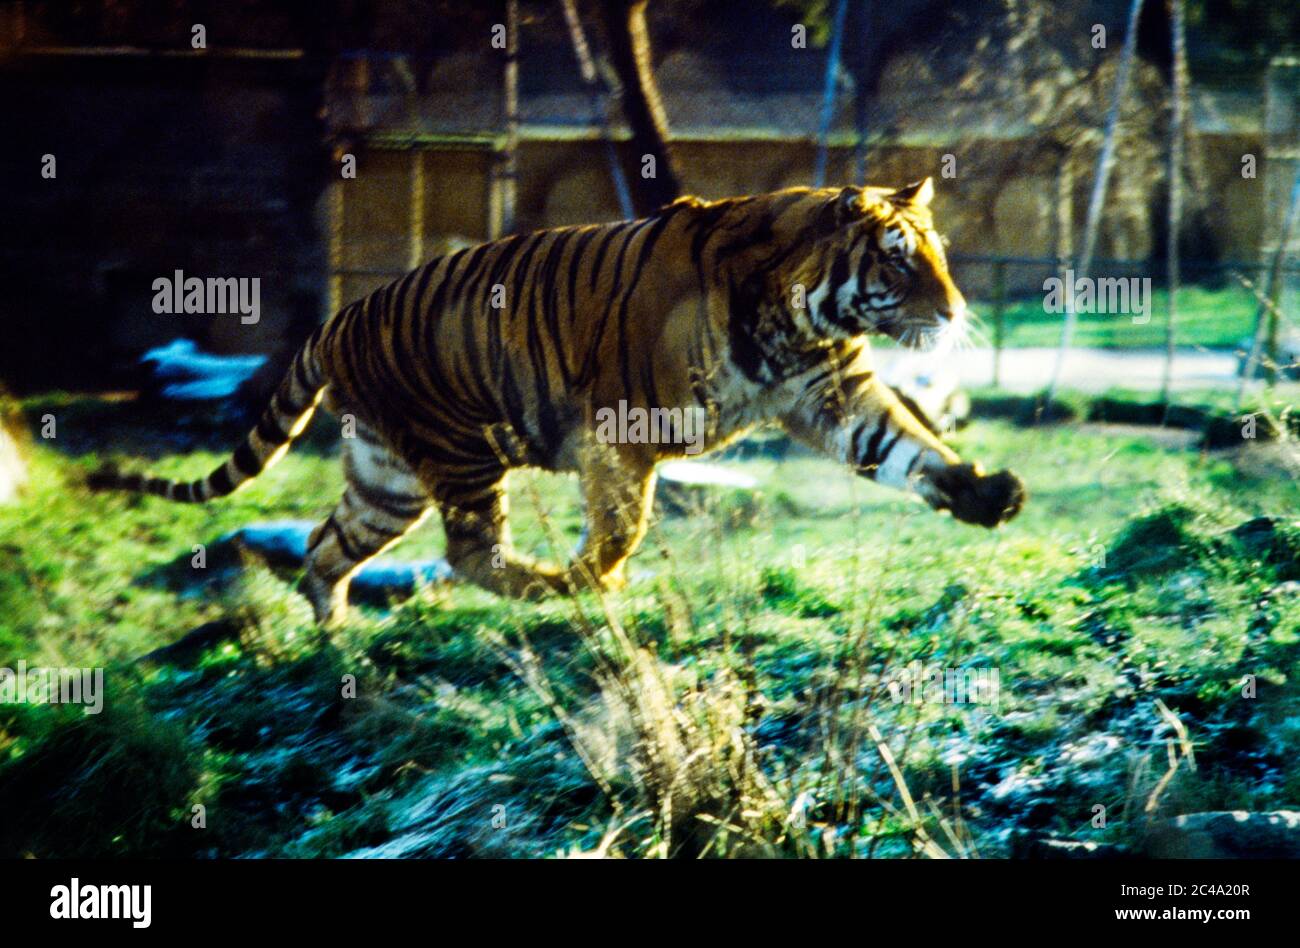 Tiger Running in a Zoo Stock Photo